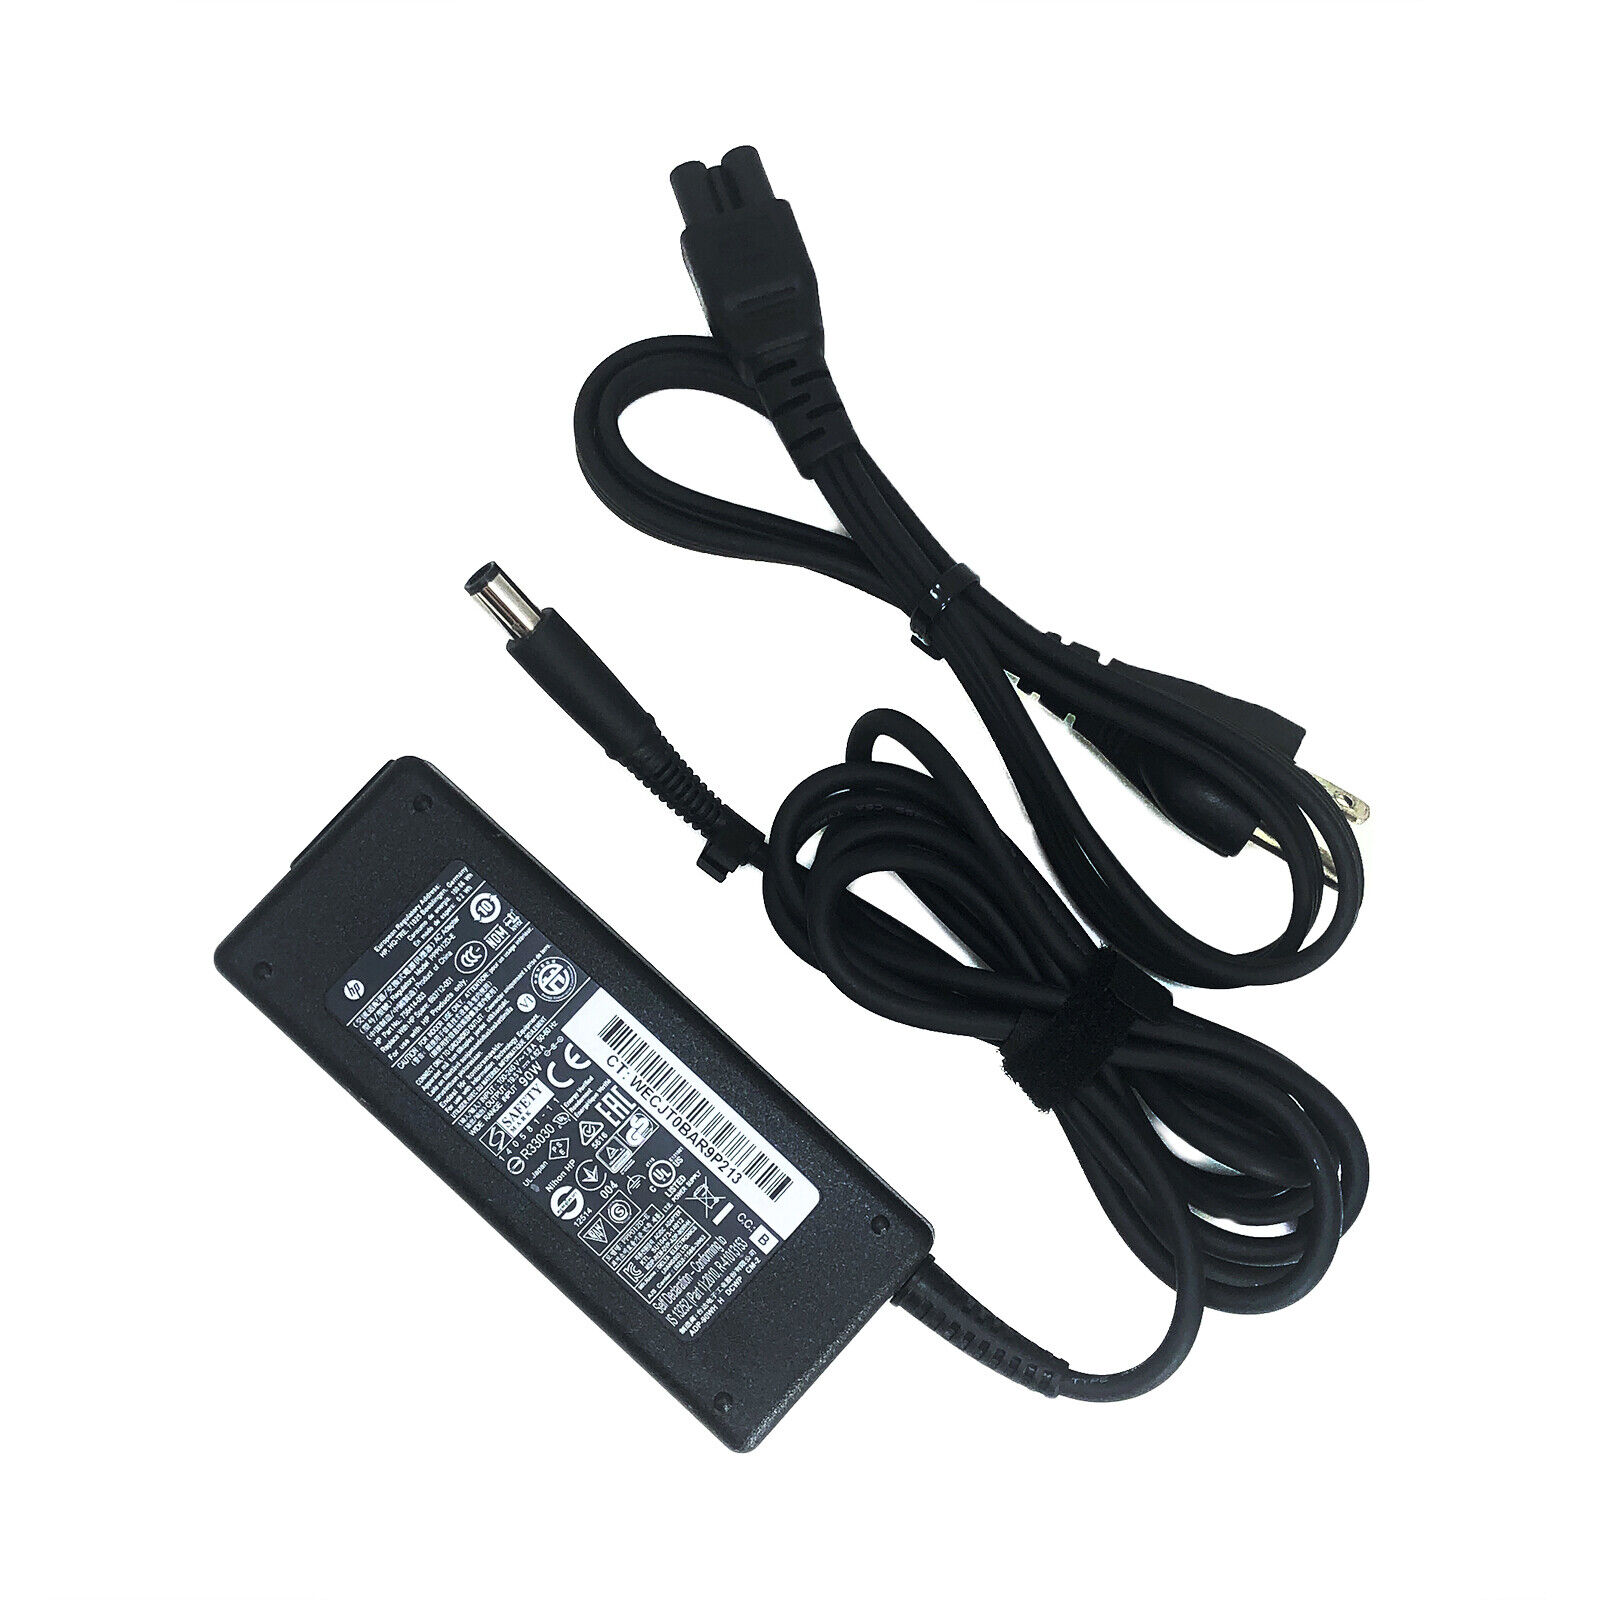 Genuine 90W HP AC Adapter for EliteDesk 705 G1 G4 G5 DM Mini Business PC Charger